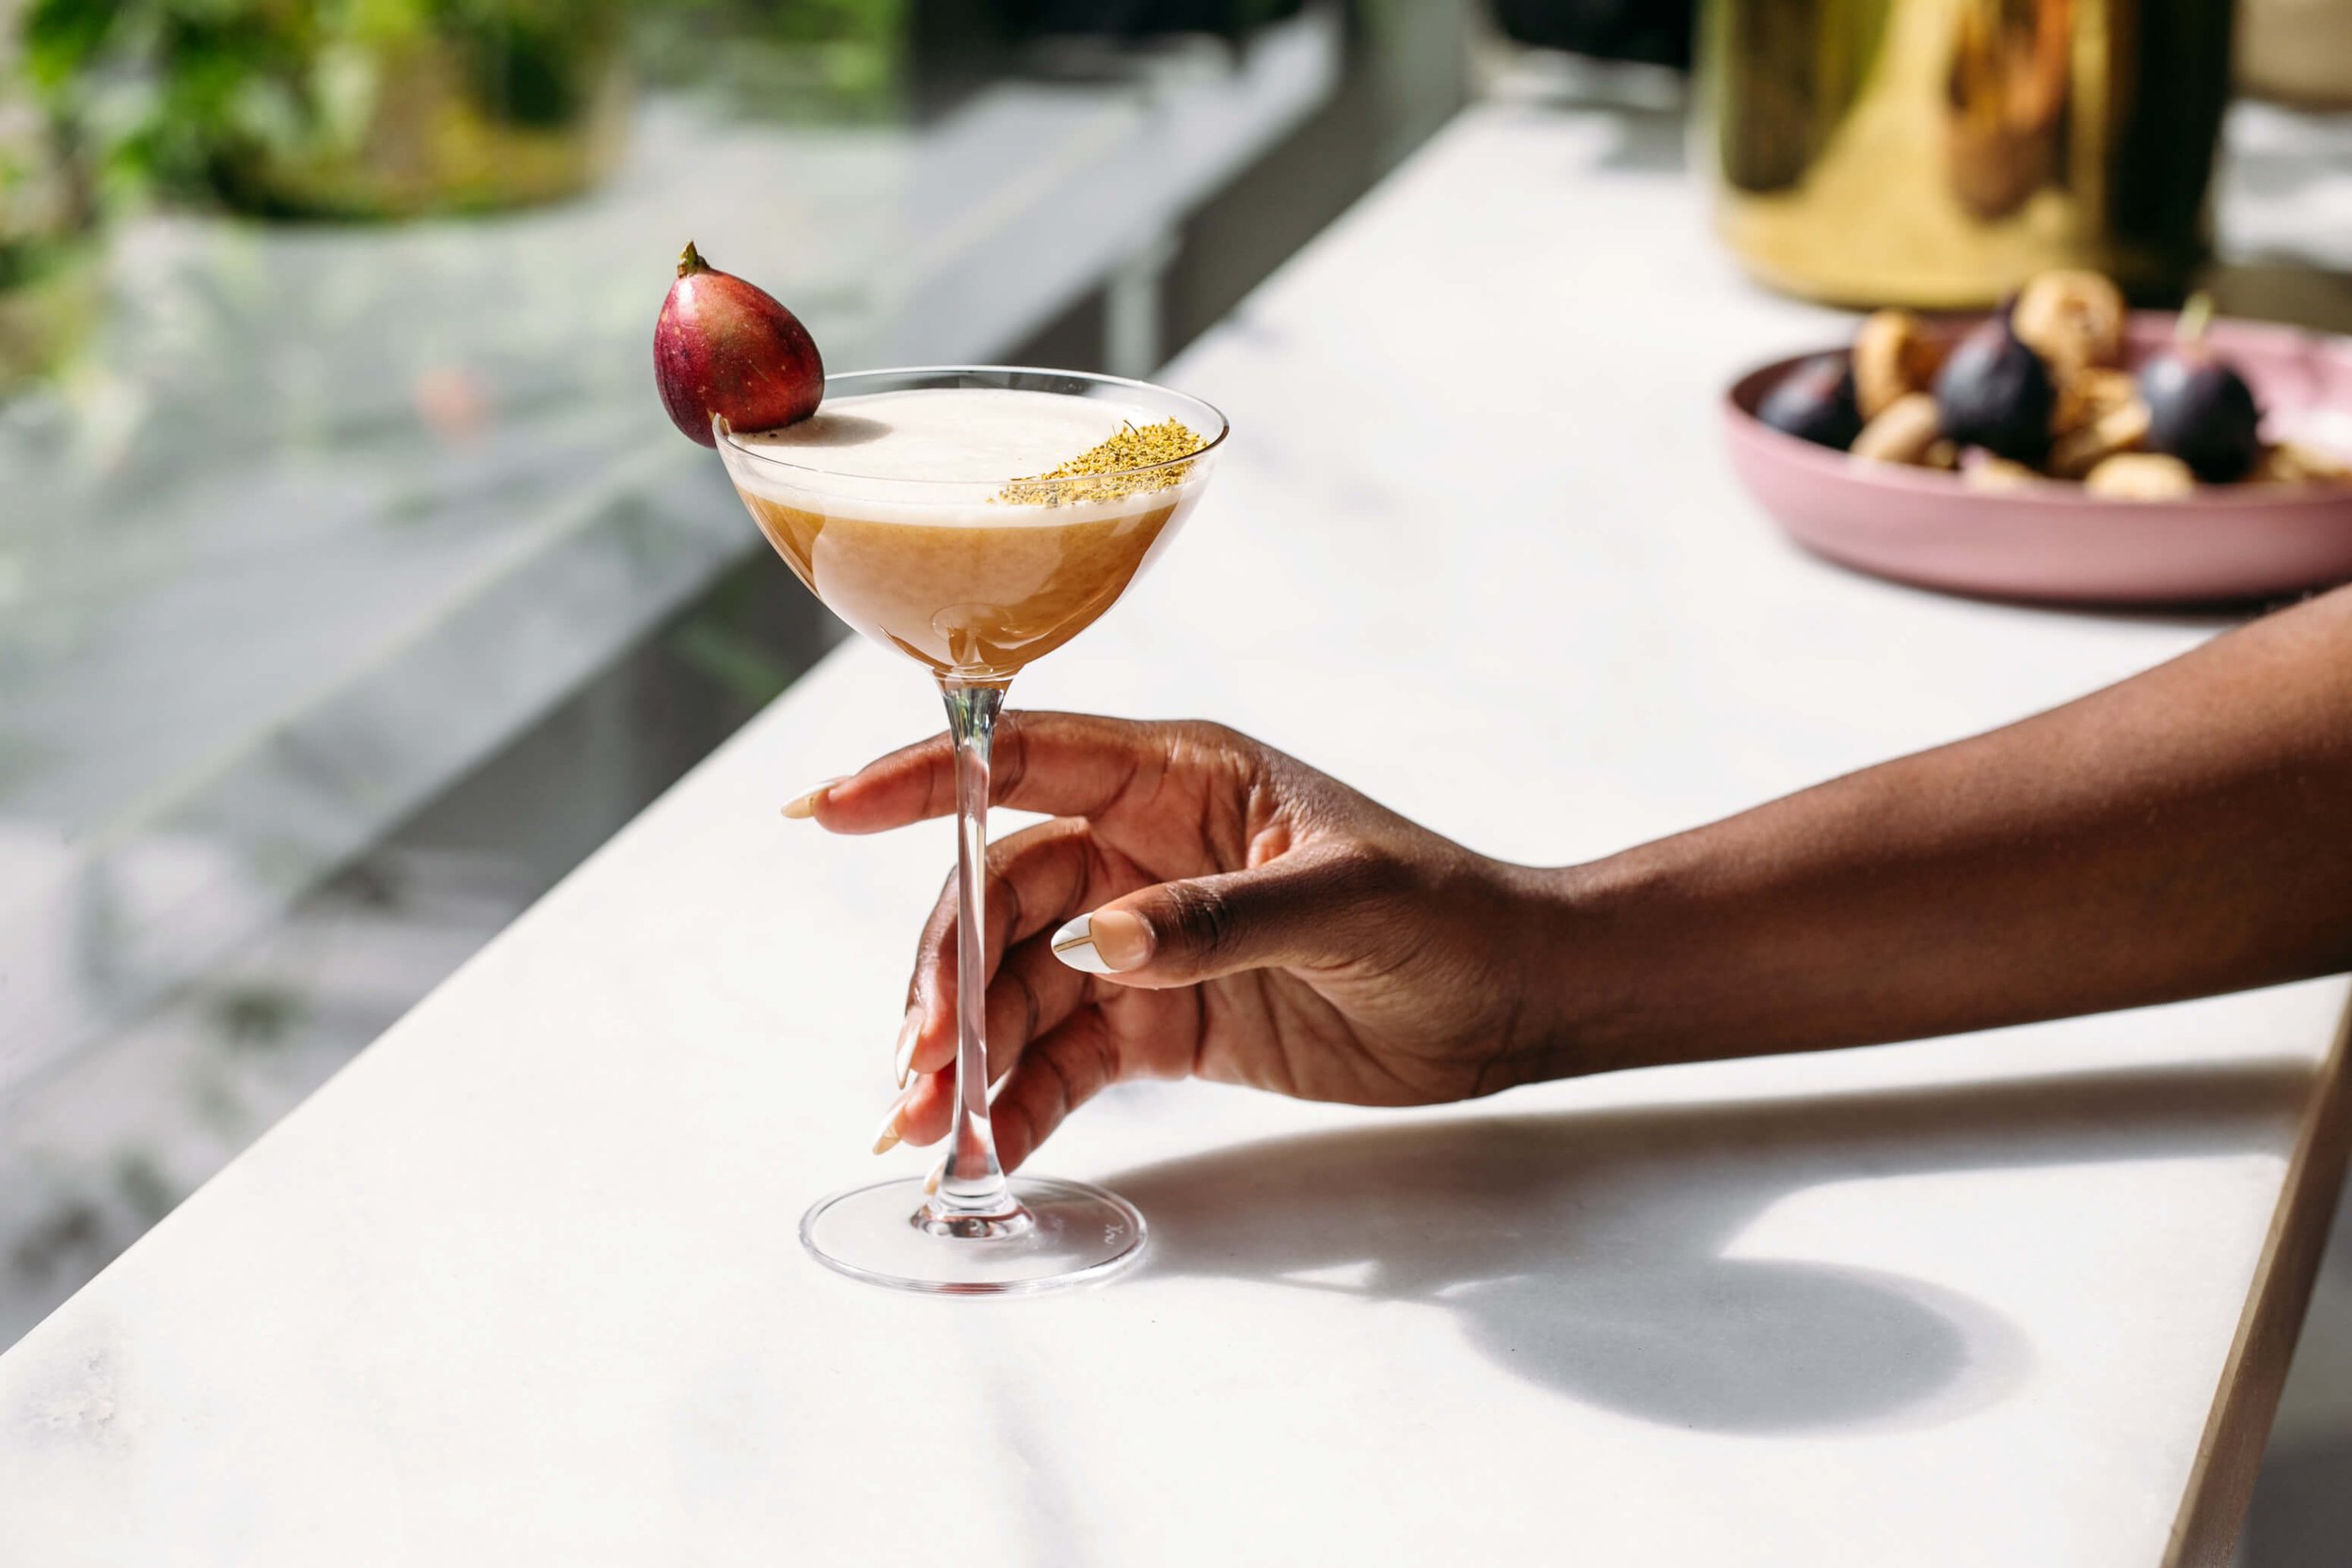 Grilled Cheese Martini Cocktail Recipe Video - Thrillist